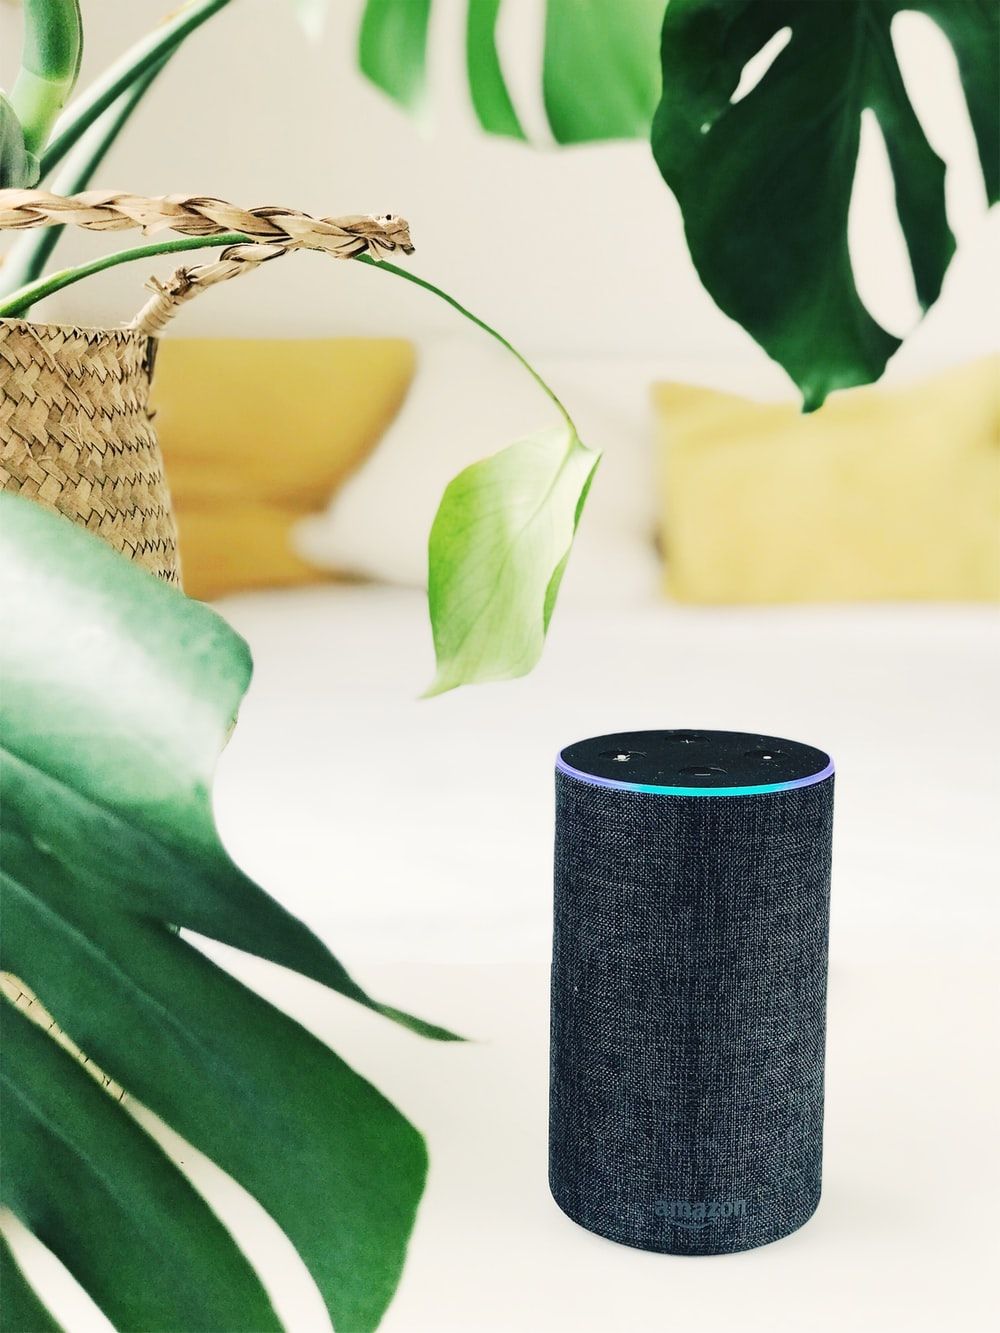 HQ Amazon Echo Picture. Download Free Image